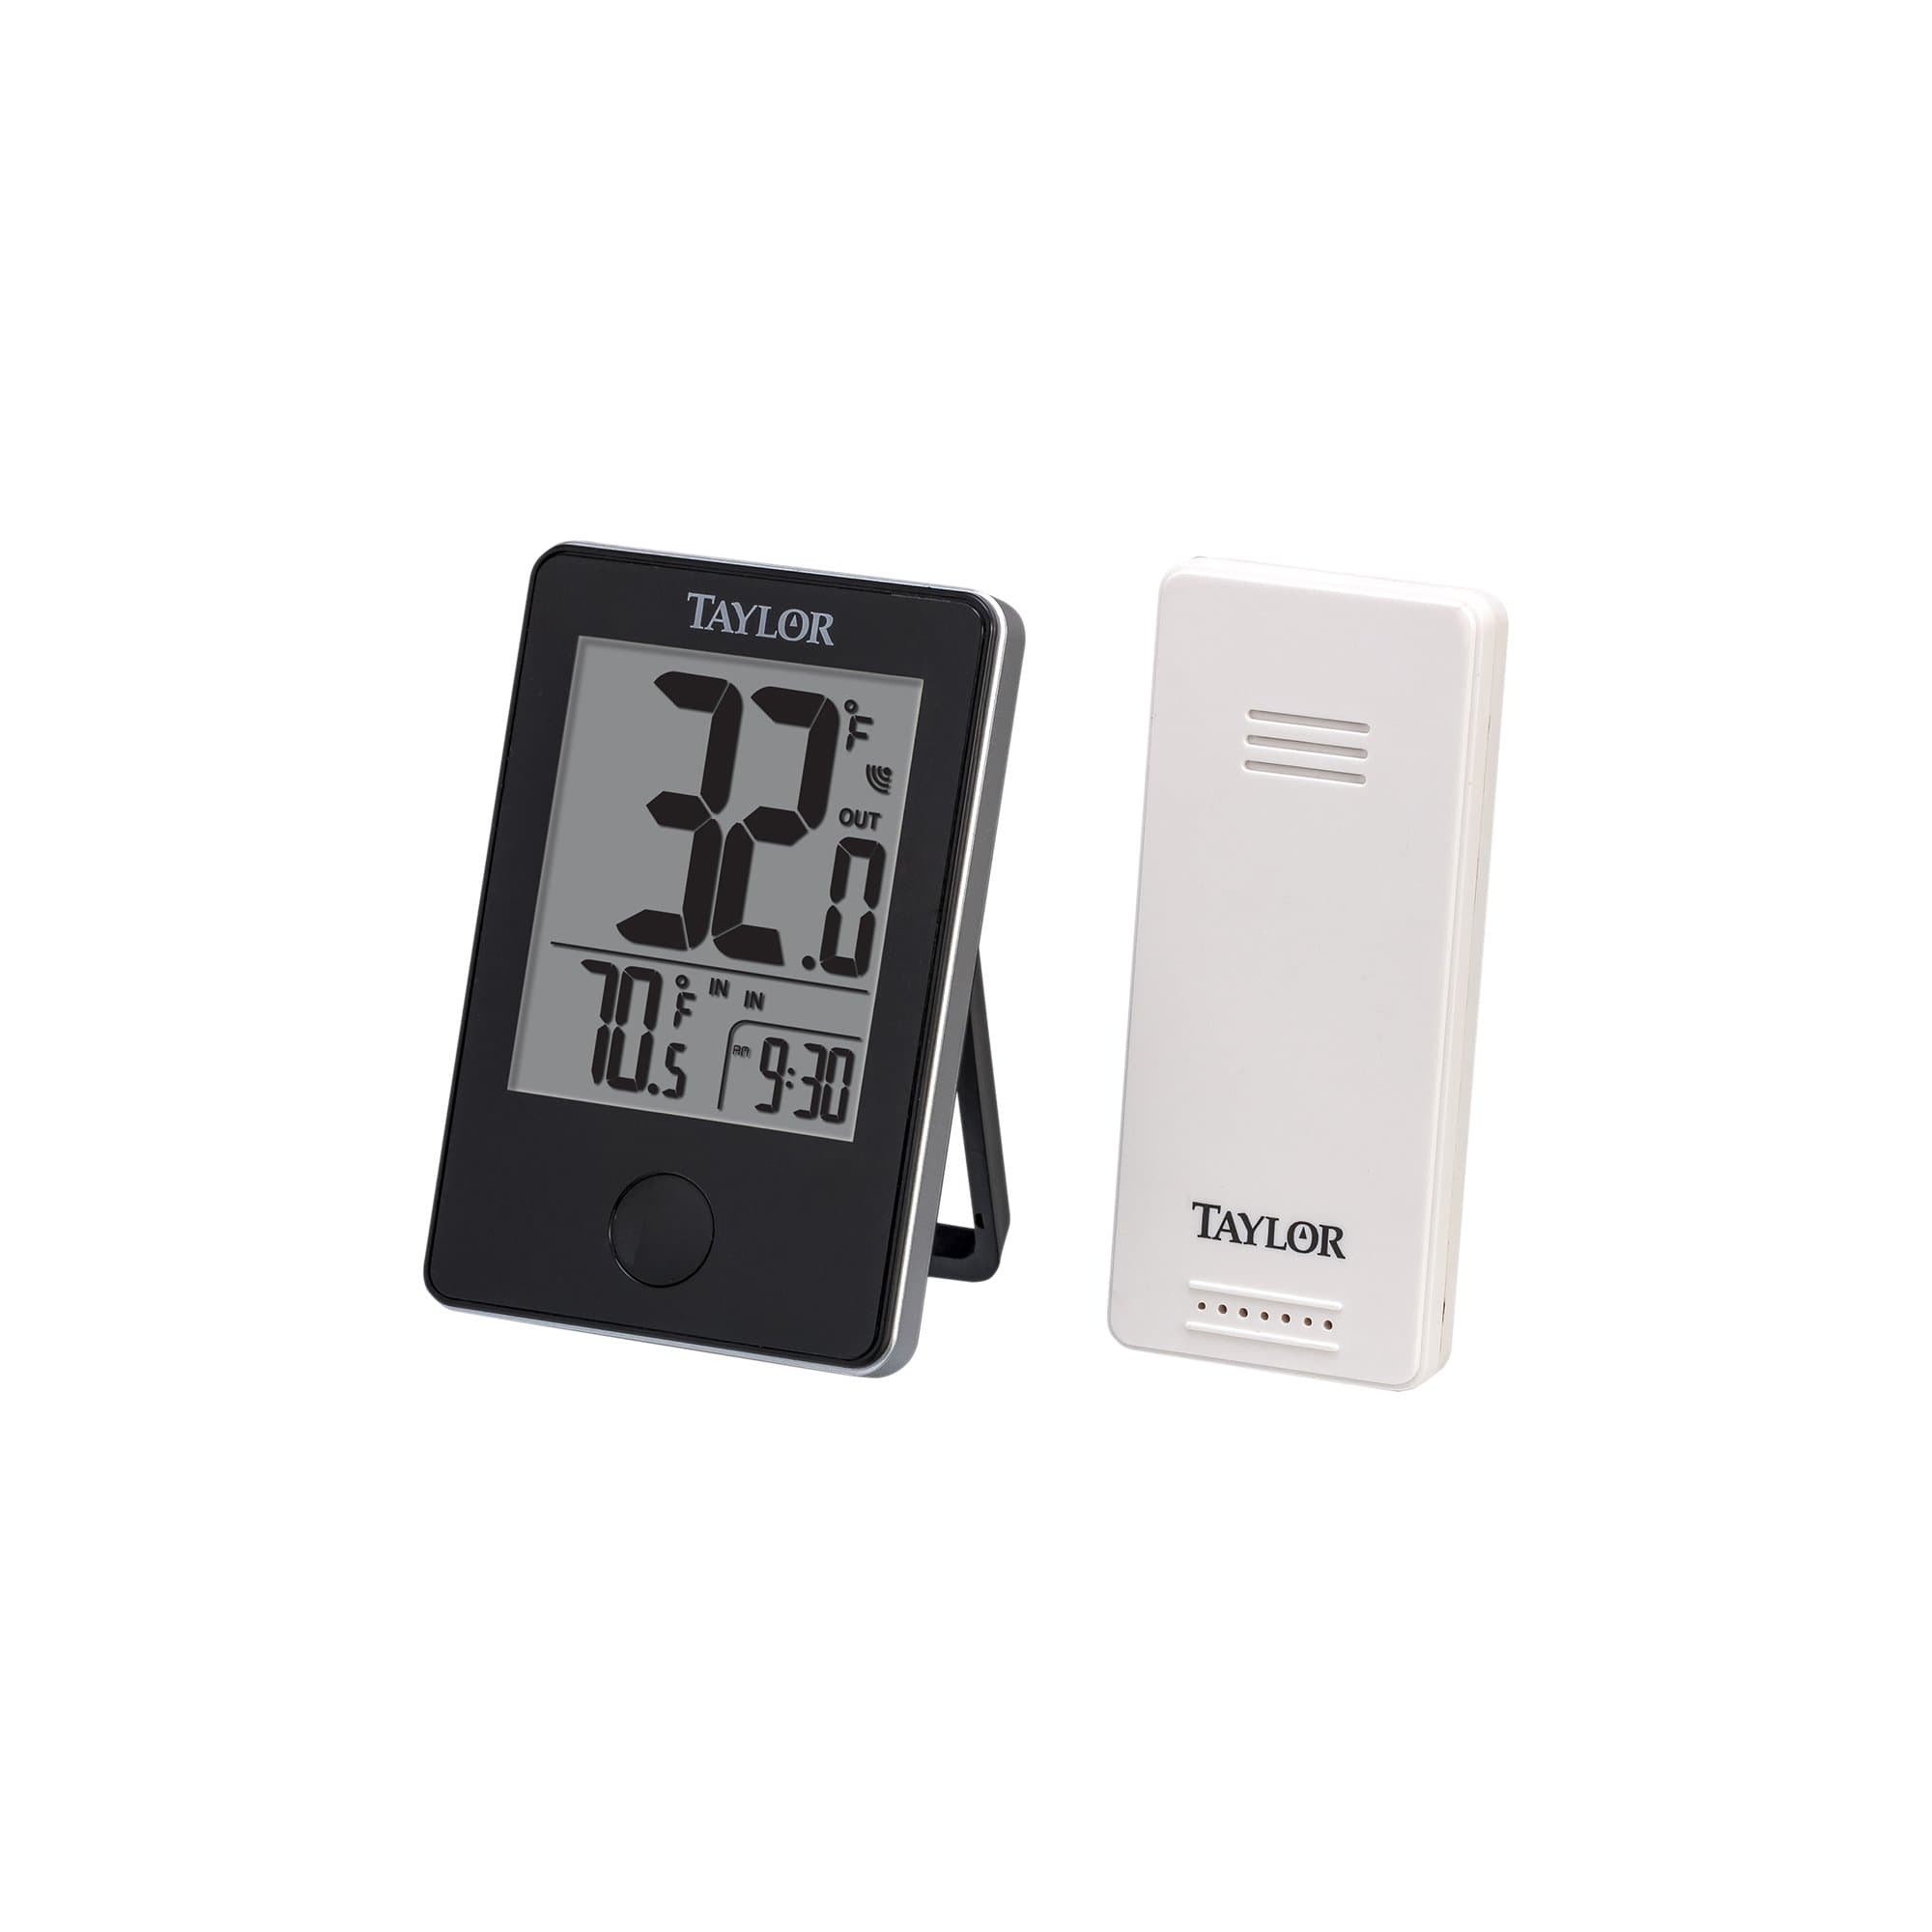 https://www.momjunction.com/wp-content/uploads/product-images/taylor-precision-products-wireless-digital-indoor-outdoor-thermometer_afl105.jpg